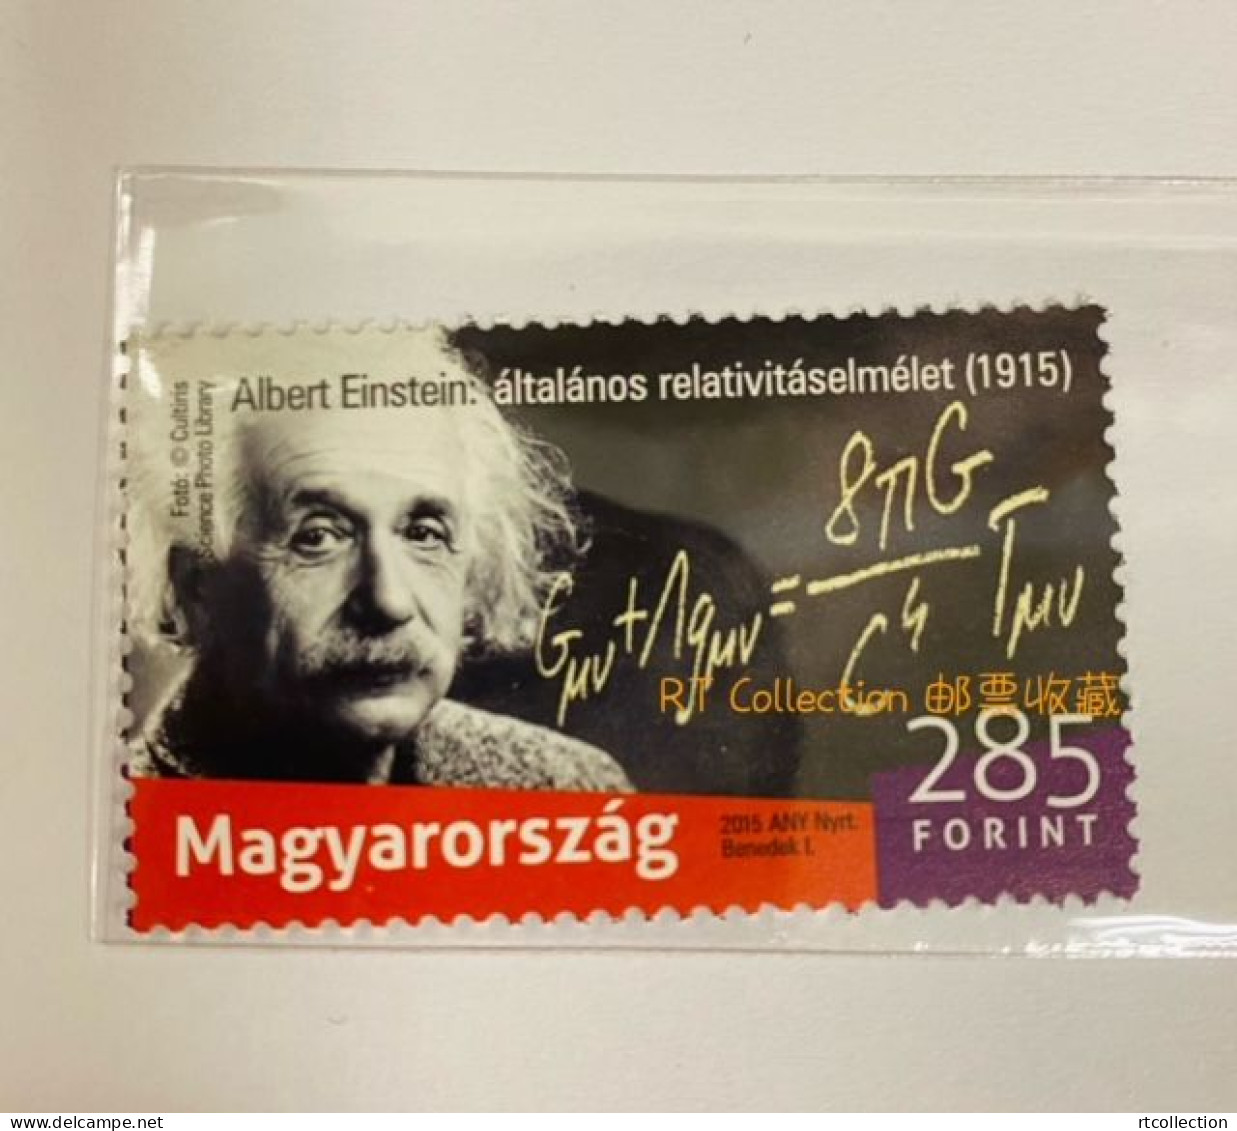 Hungary 2015 100th Anniv Albert Einstein General Theory Of Relativity Nobel Physics Physicist Sciences People Stamp MNH - Physik